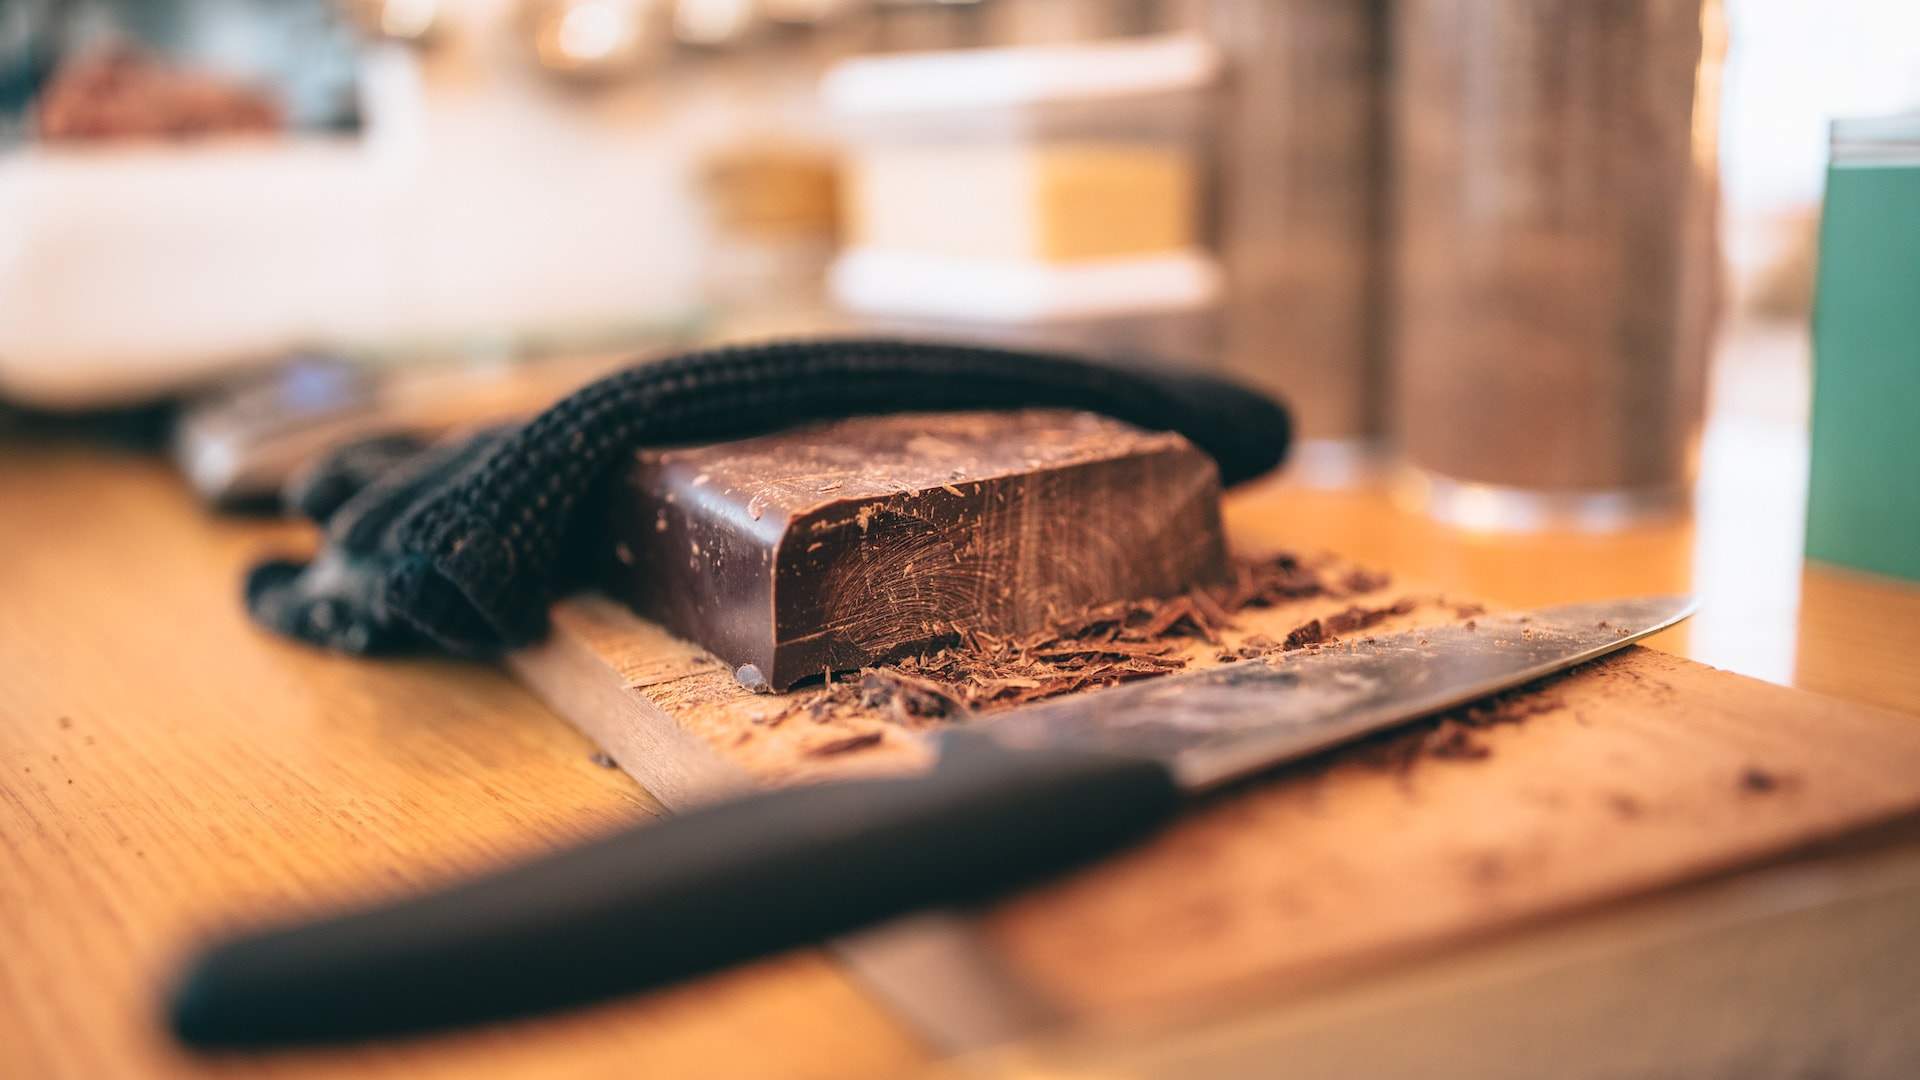 Discover the Art of Chocolate Making